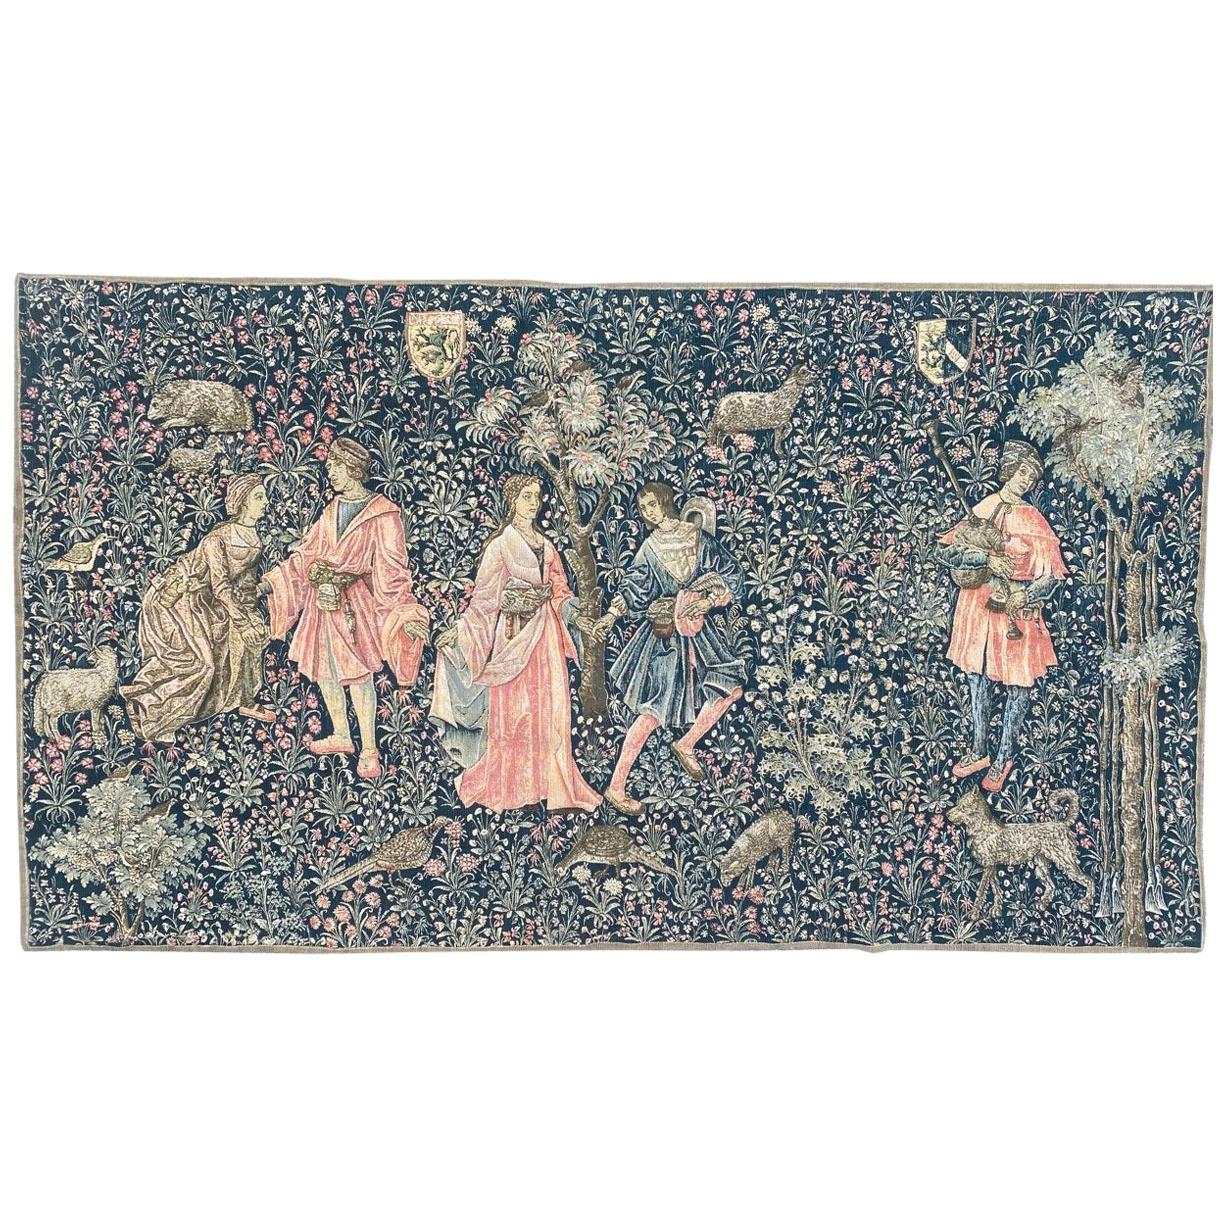 Pretty Vintage French Hand Printed Tapestry Titled "the danse"